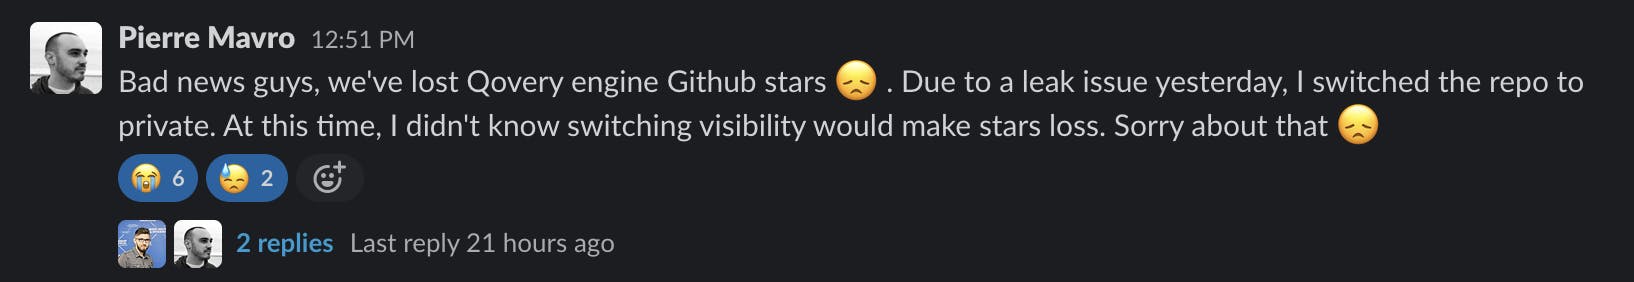 Pierre sadly announce the lost of the Github stars